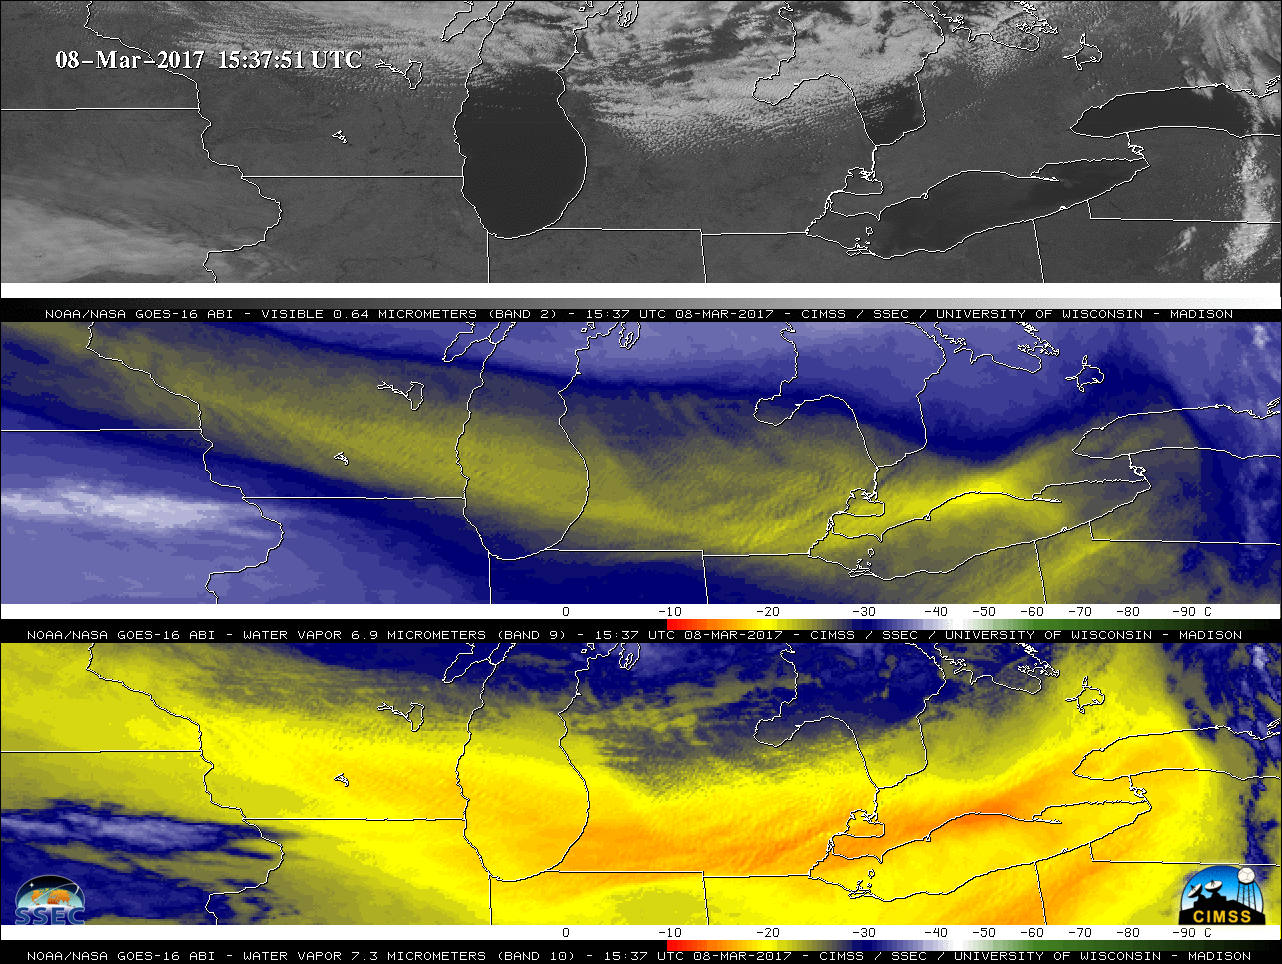 GOES-16 images: 0.64 µm Visible (top), 6.9 µm Water Vapor (middle) and 7.4 µm Water Vapor (bottom) [click to play animation]